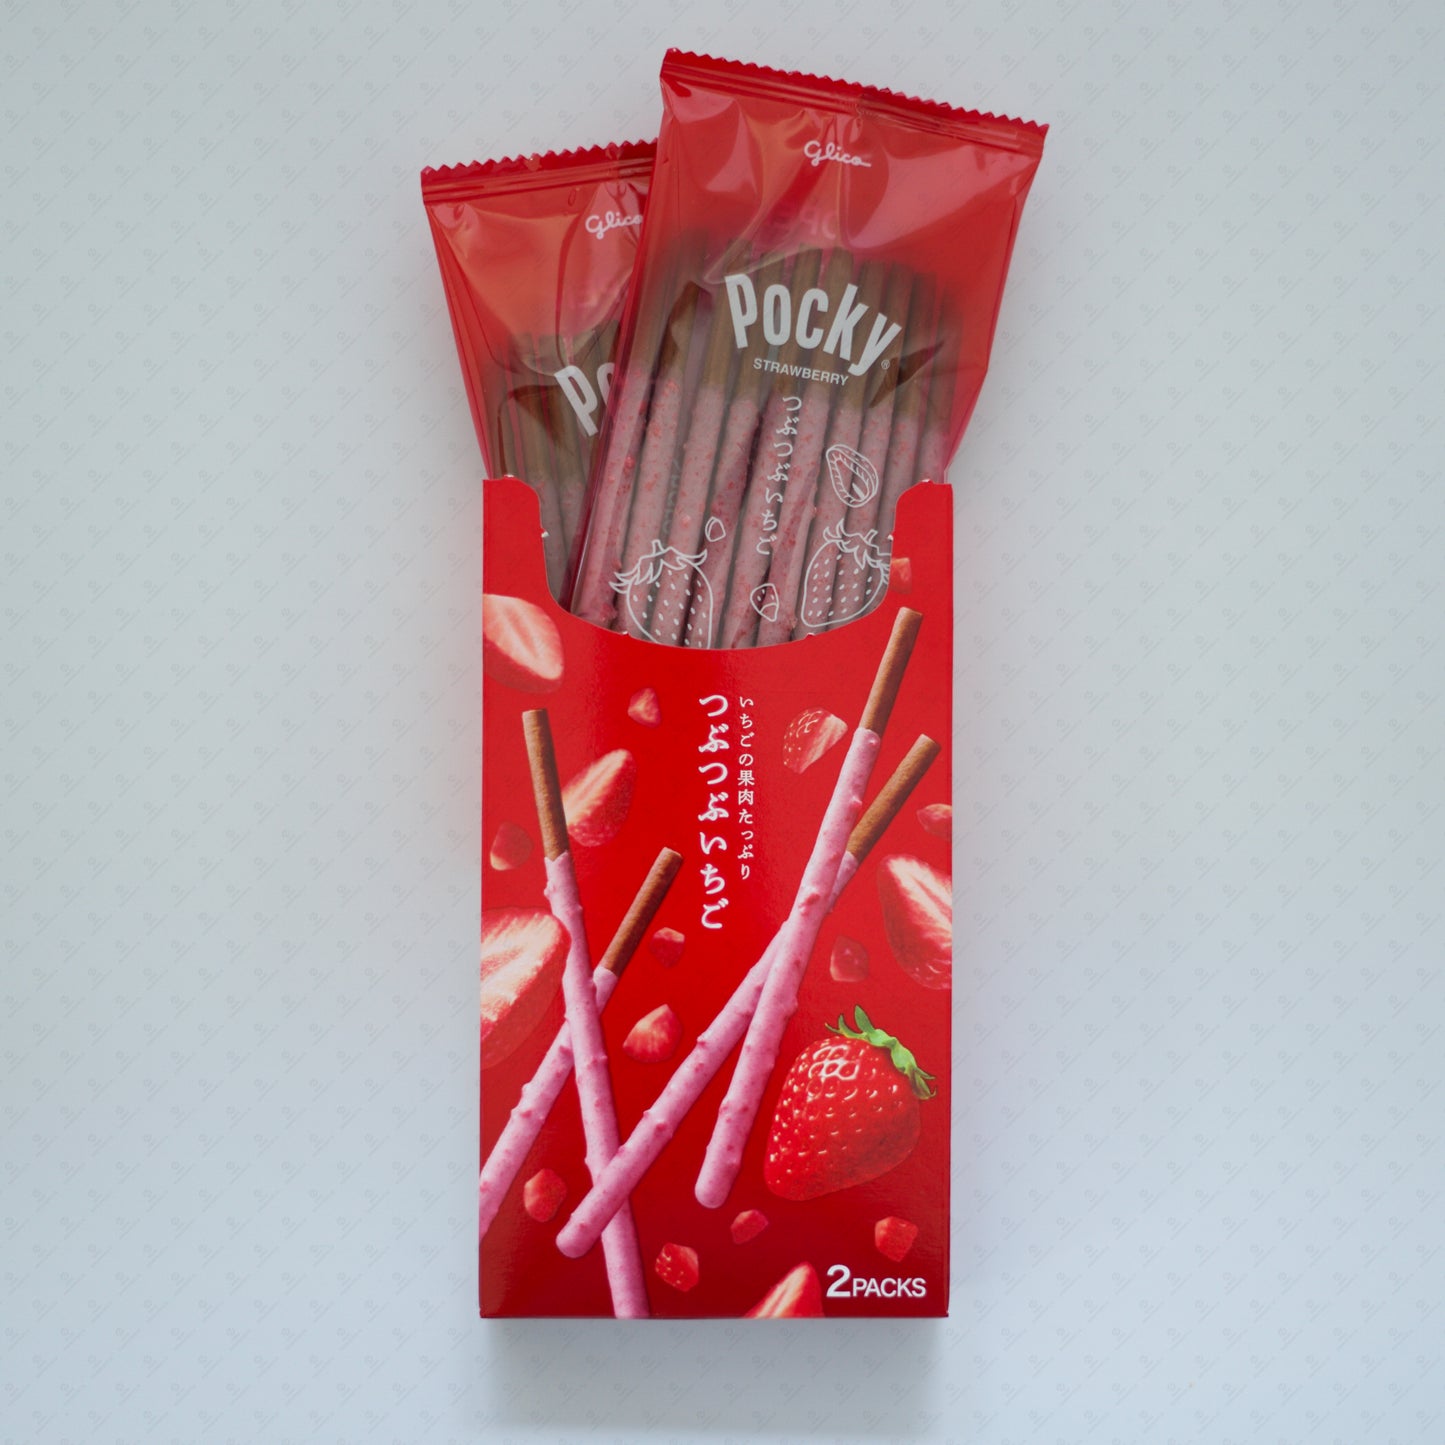 Expired - Glico Pocky Crunchy Strawberry Cream Covered Chocolate Biscuit Sticks